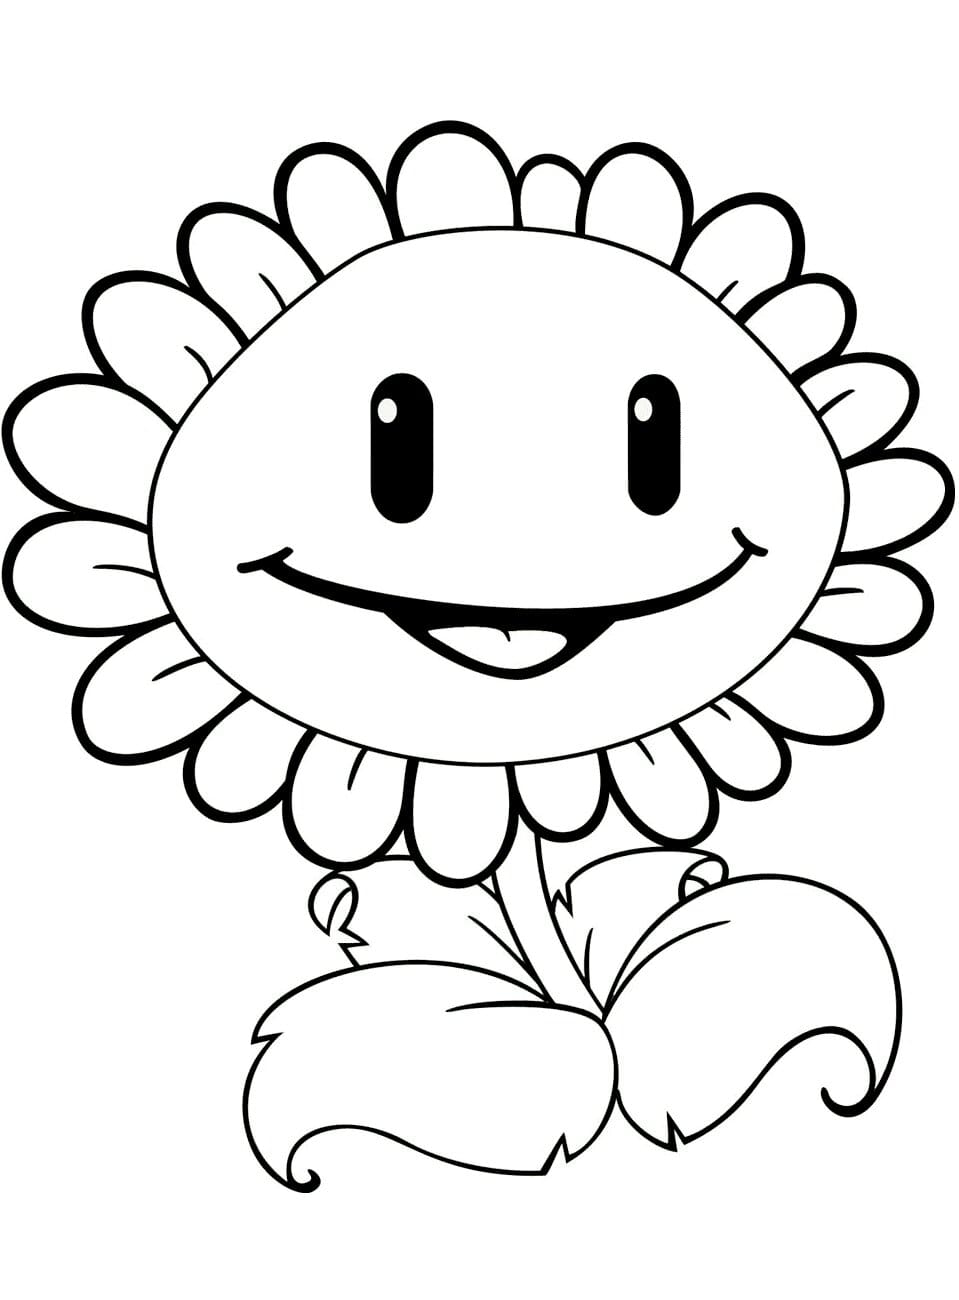 A Little Sunflower Coloring Page